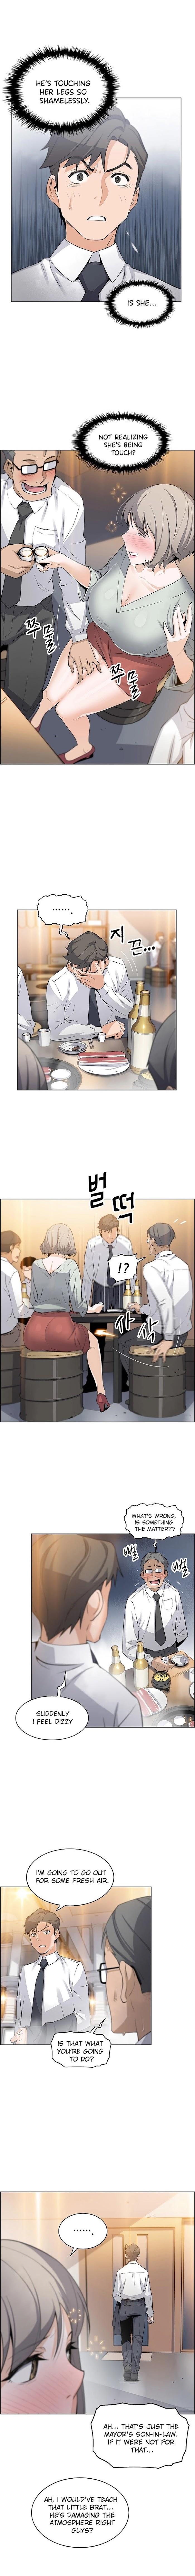 Housekeeper [Neck Pillow, Paper] Ch.49/49 [English] [Manhwa PDF] Completed 159